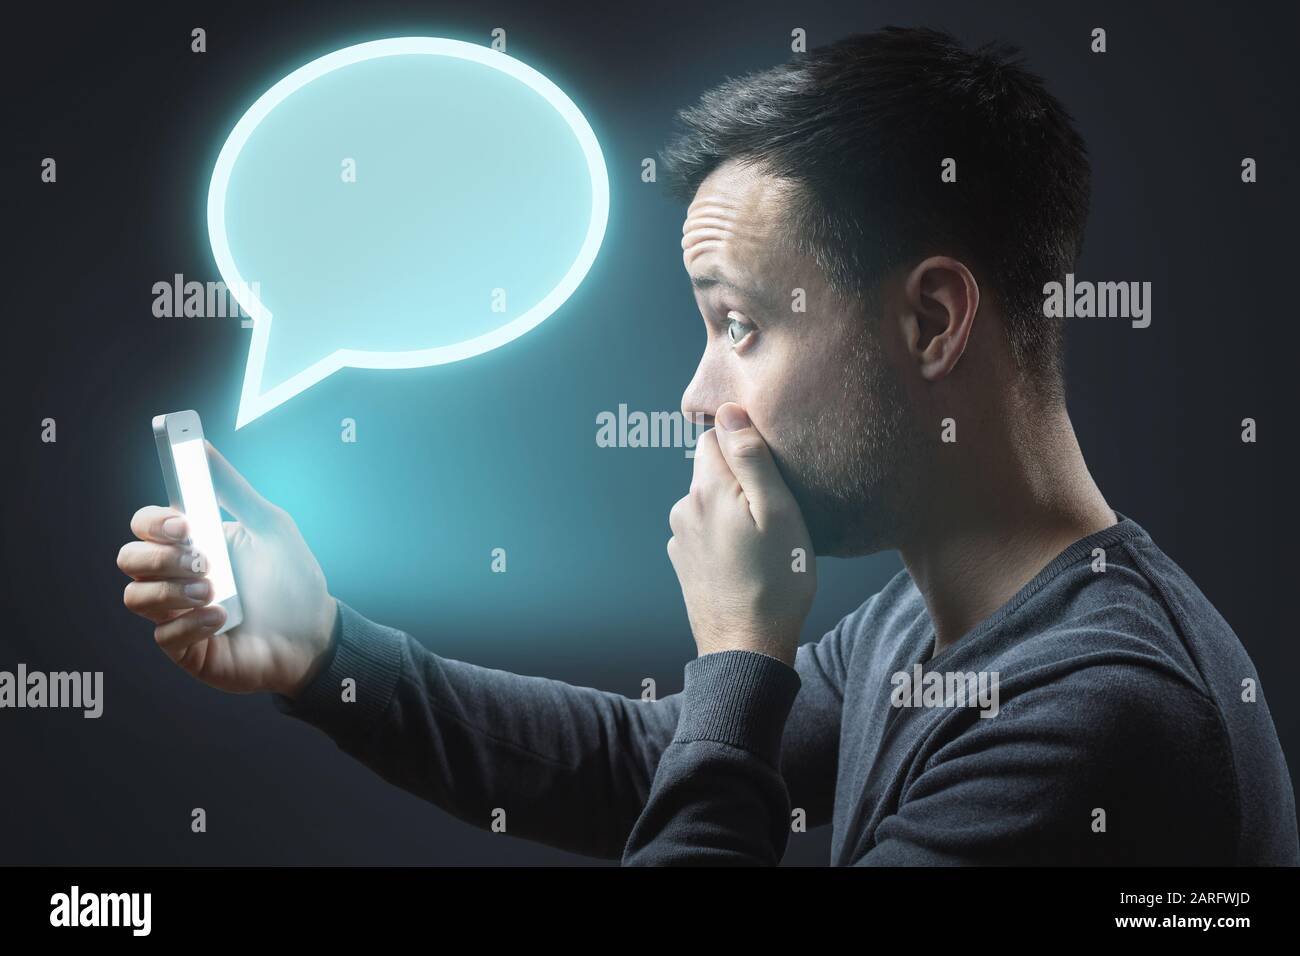 Appalled man getting a message on his smartphone Stock Photo